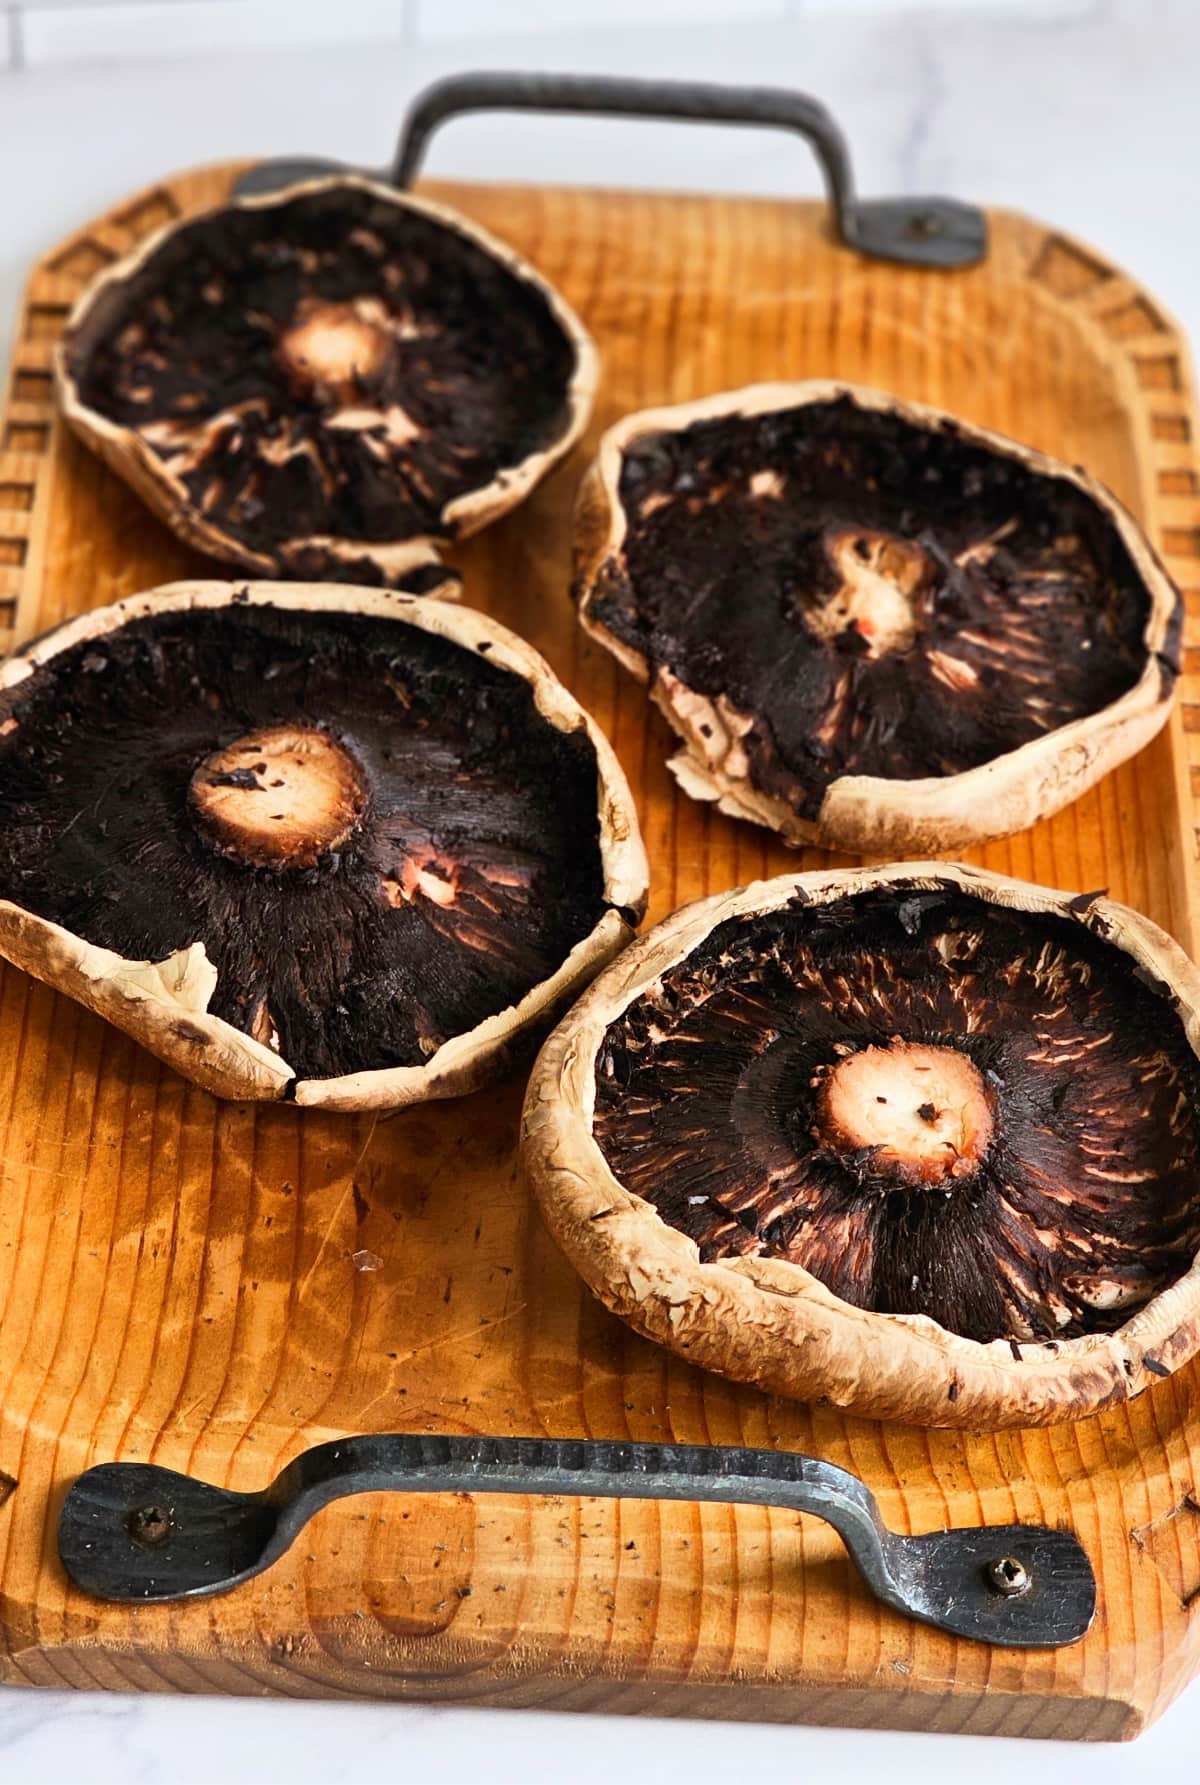 Portabella mushrooms with the gills removed on a wooden tray